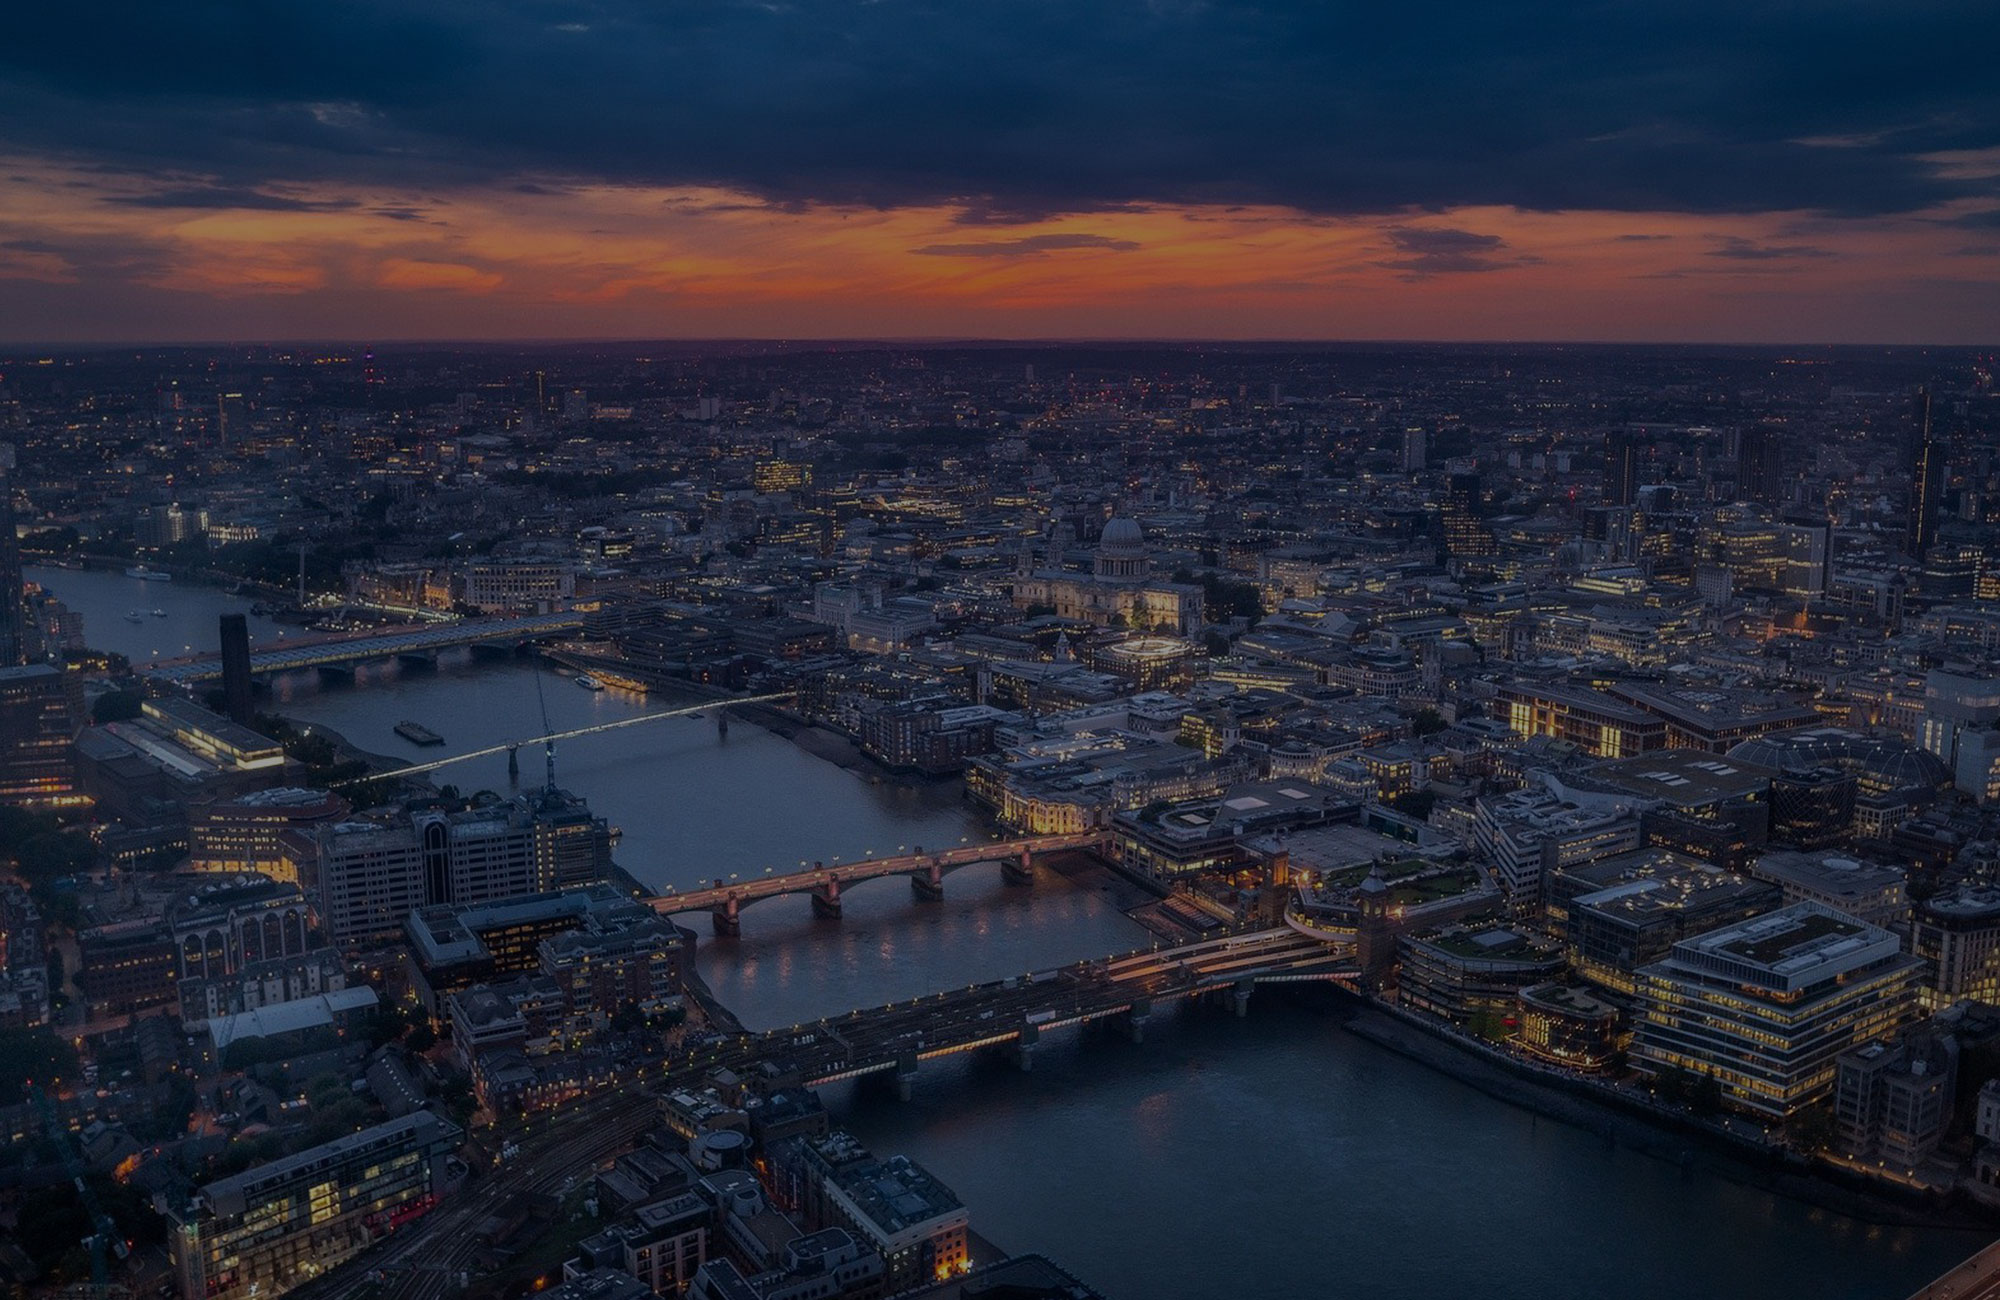 A view of the River Thames in Central London at Night